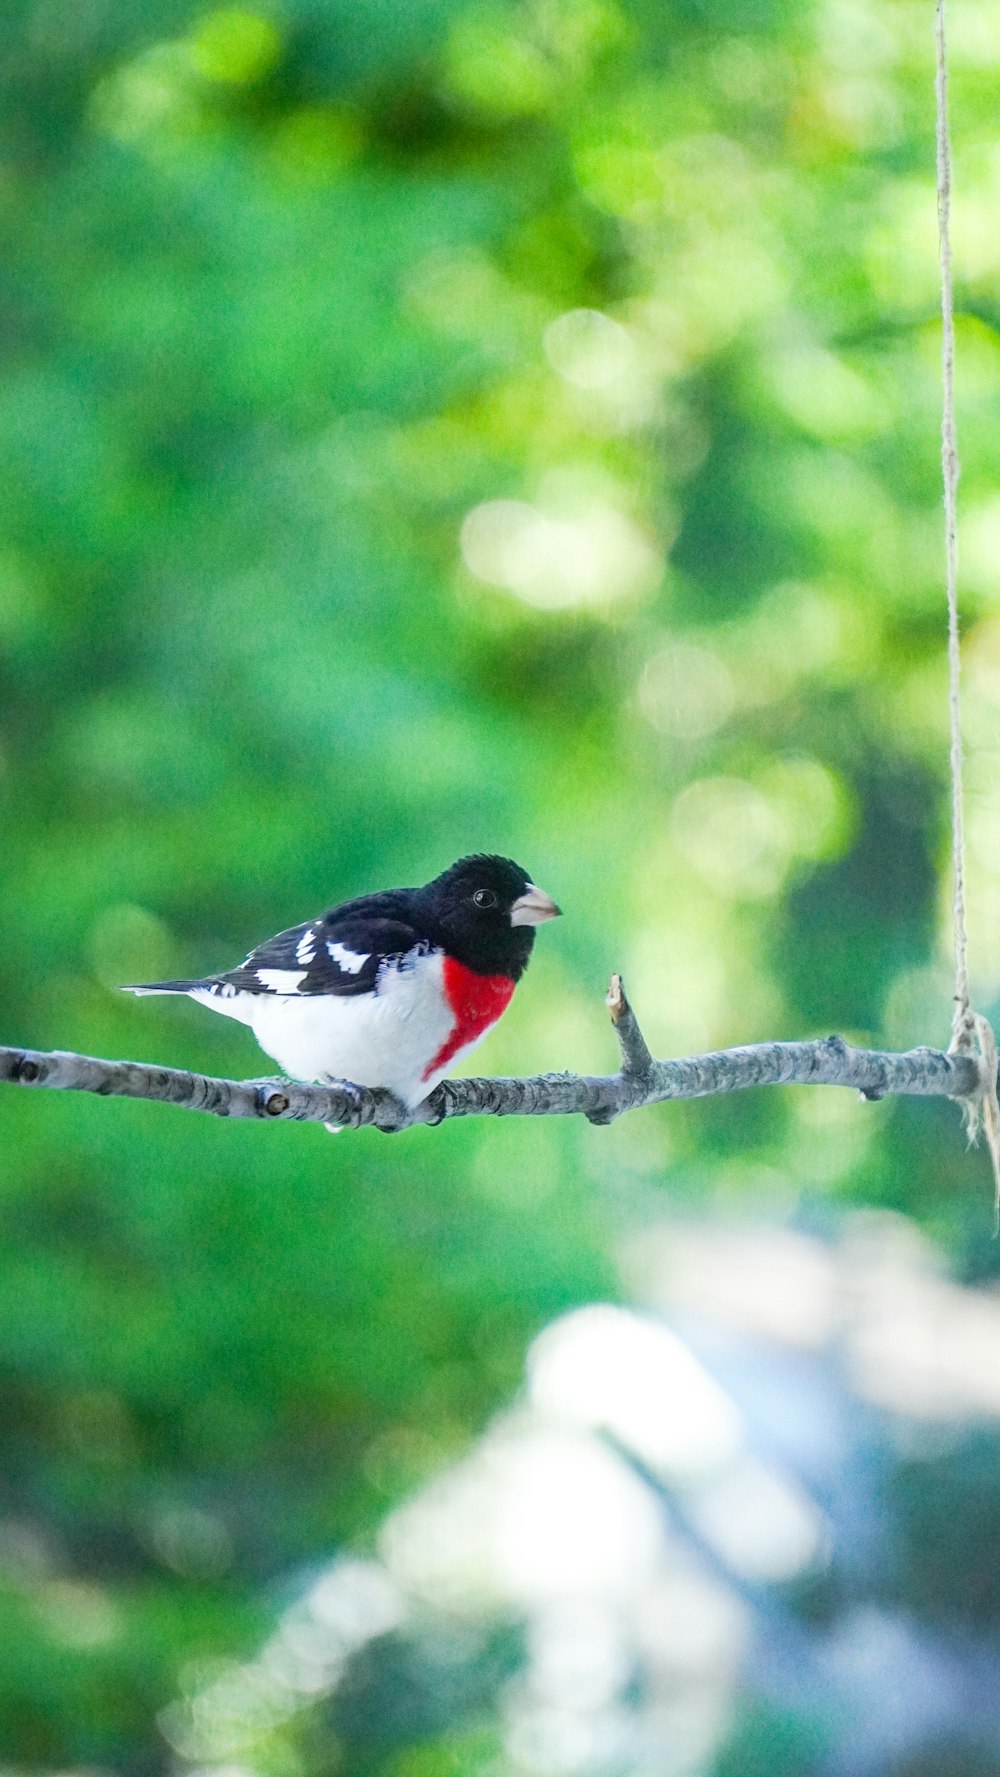 a small black and white bird sitting on a branch